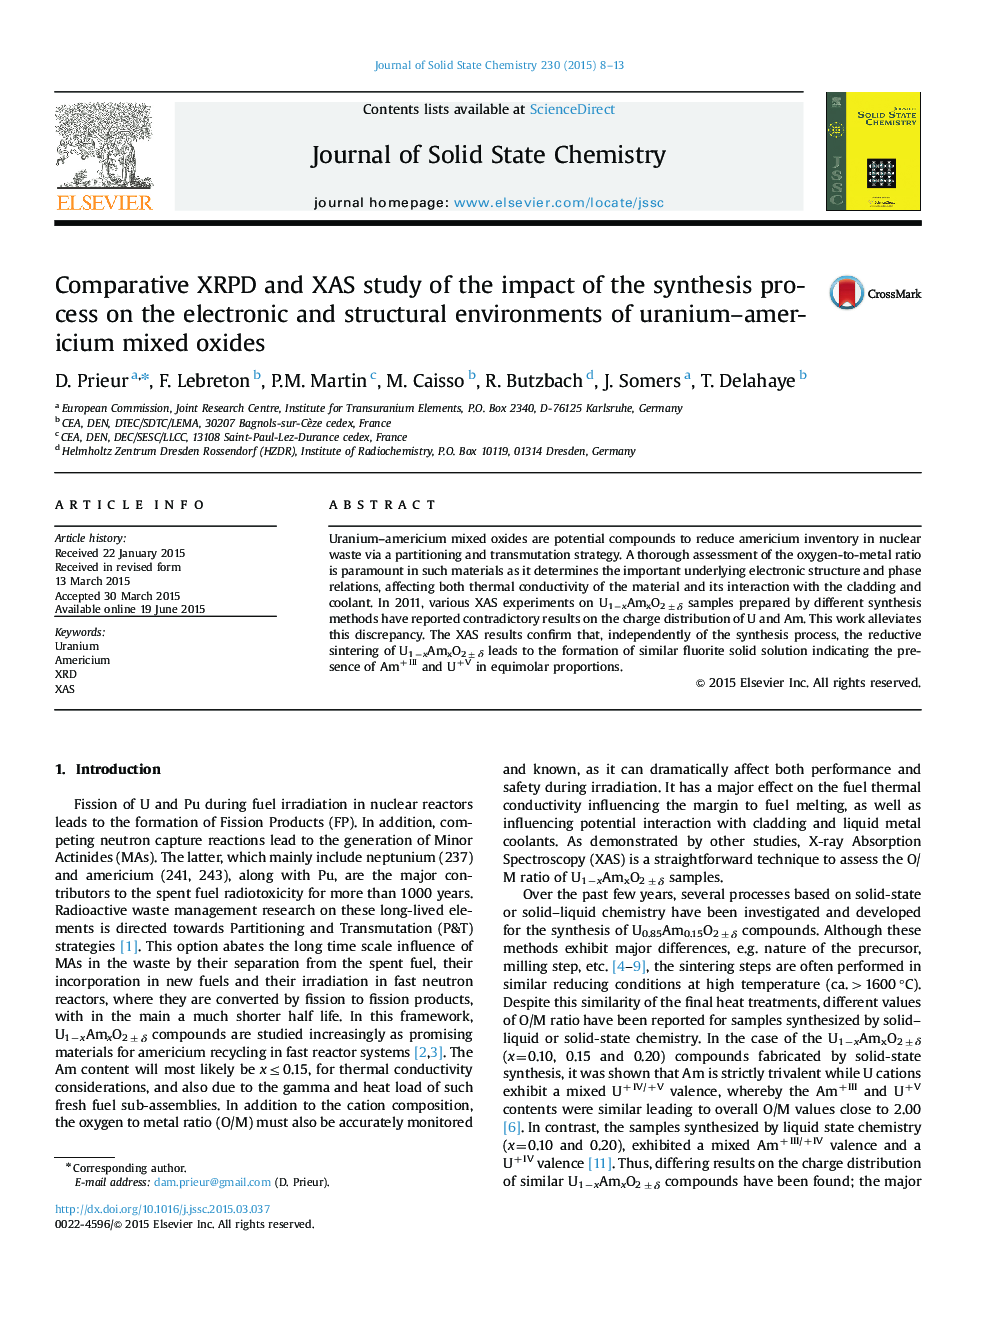 Comparative XRPD and XAS study of the impact of the synthesis process on the electronic and structural environments of uranium-americium mixed oxides